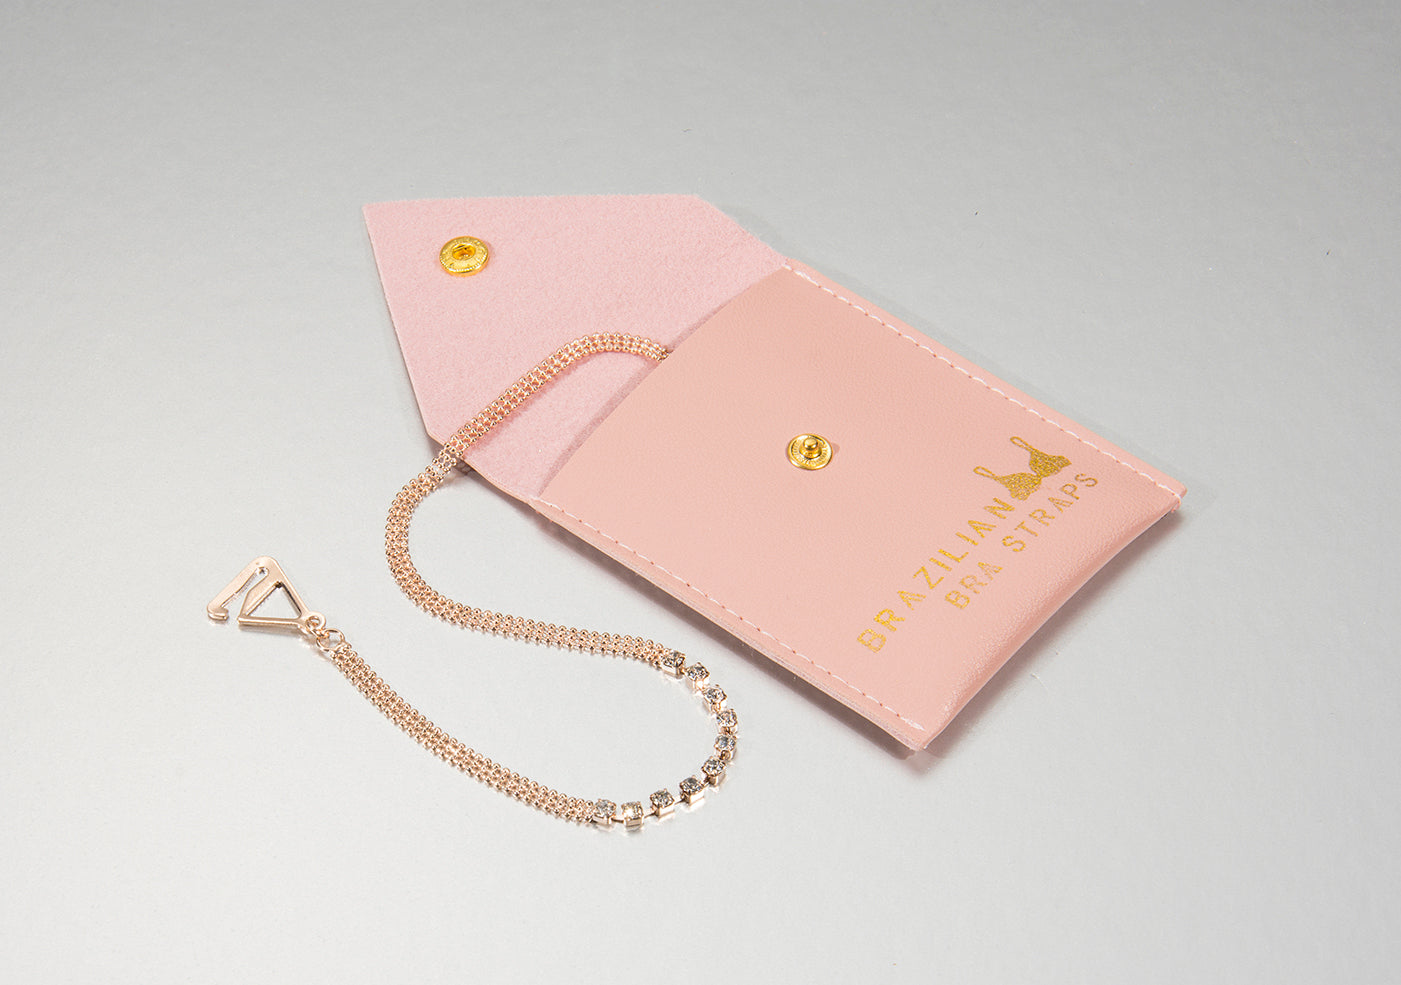 rose gold bra straps on a faux leather pouch for gift